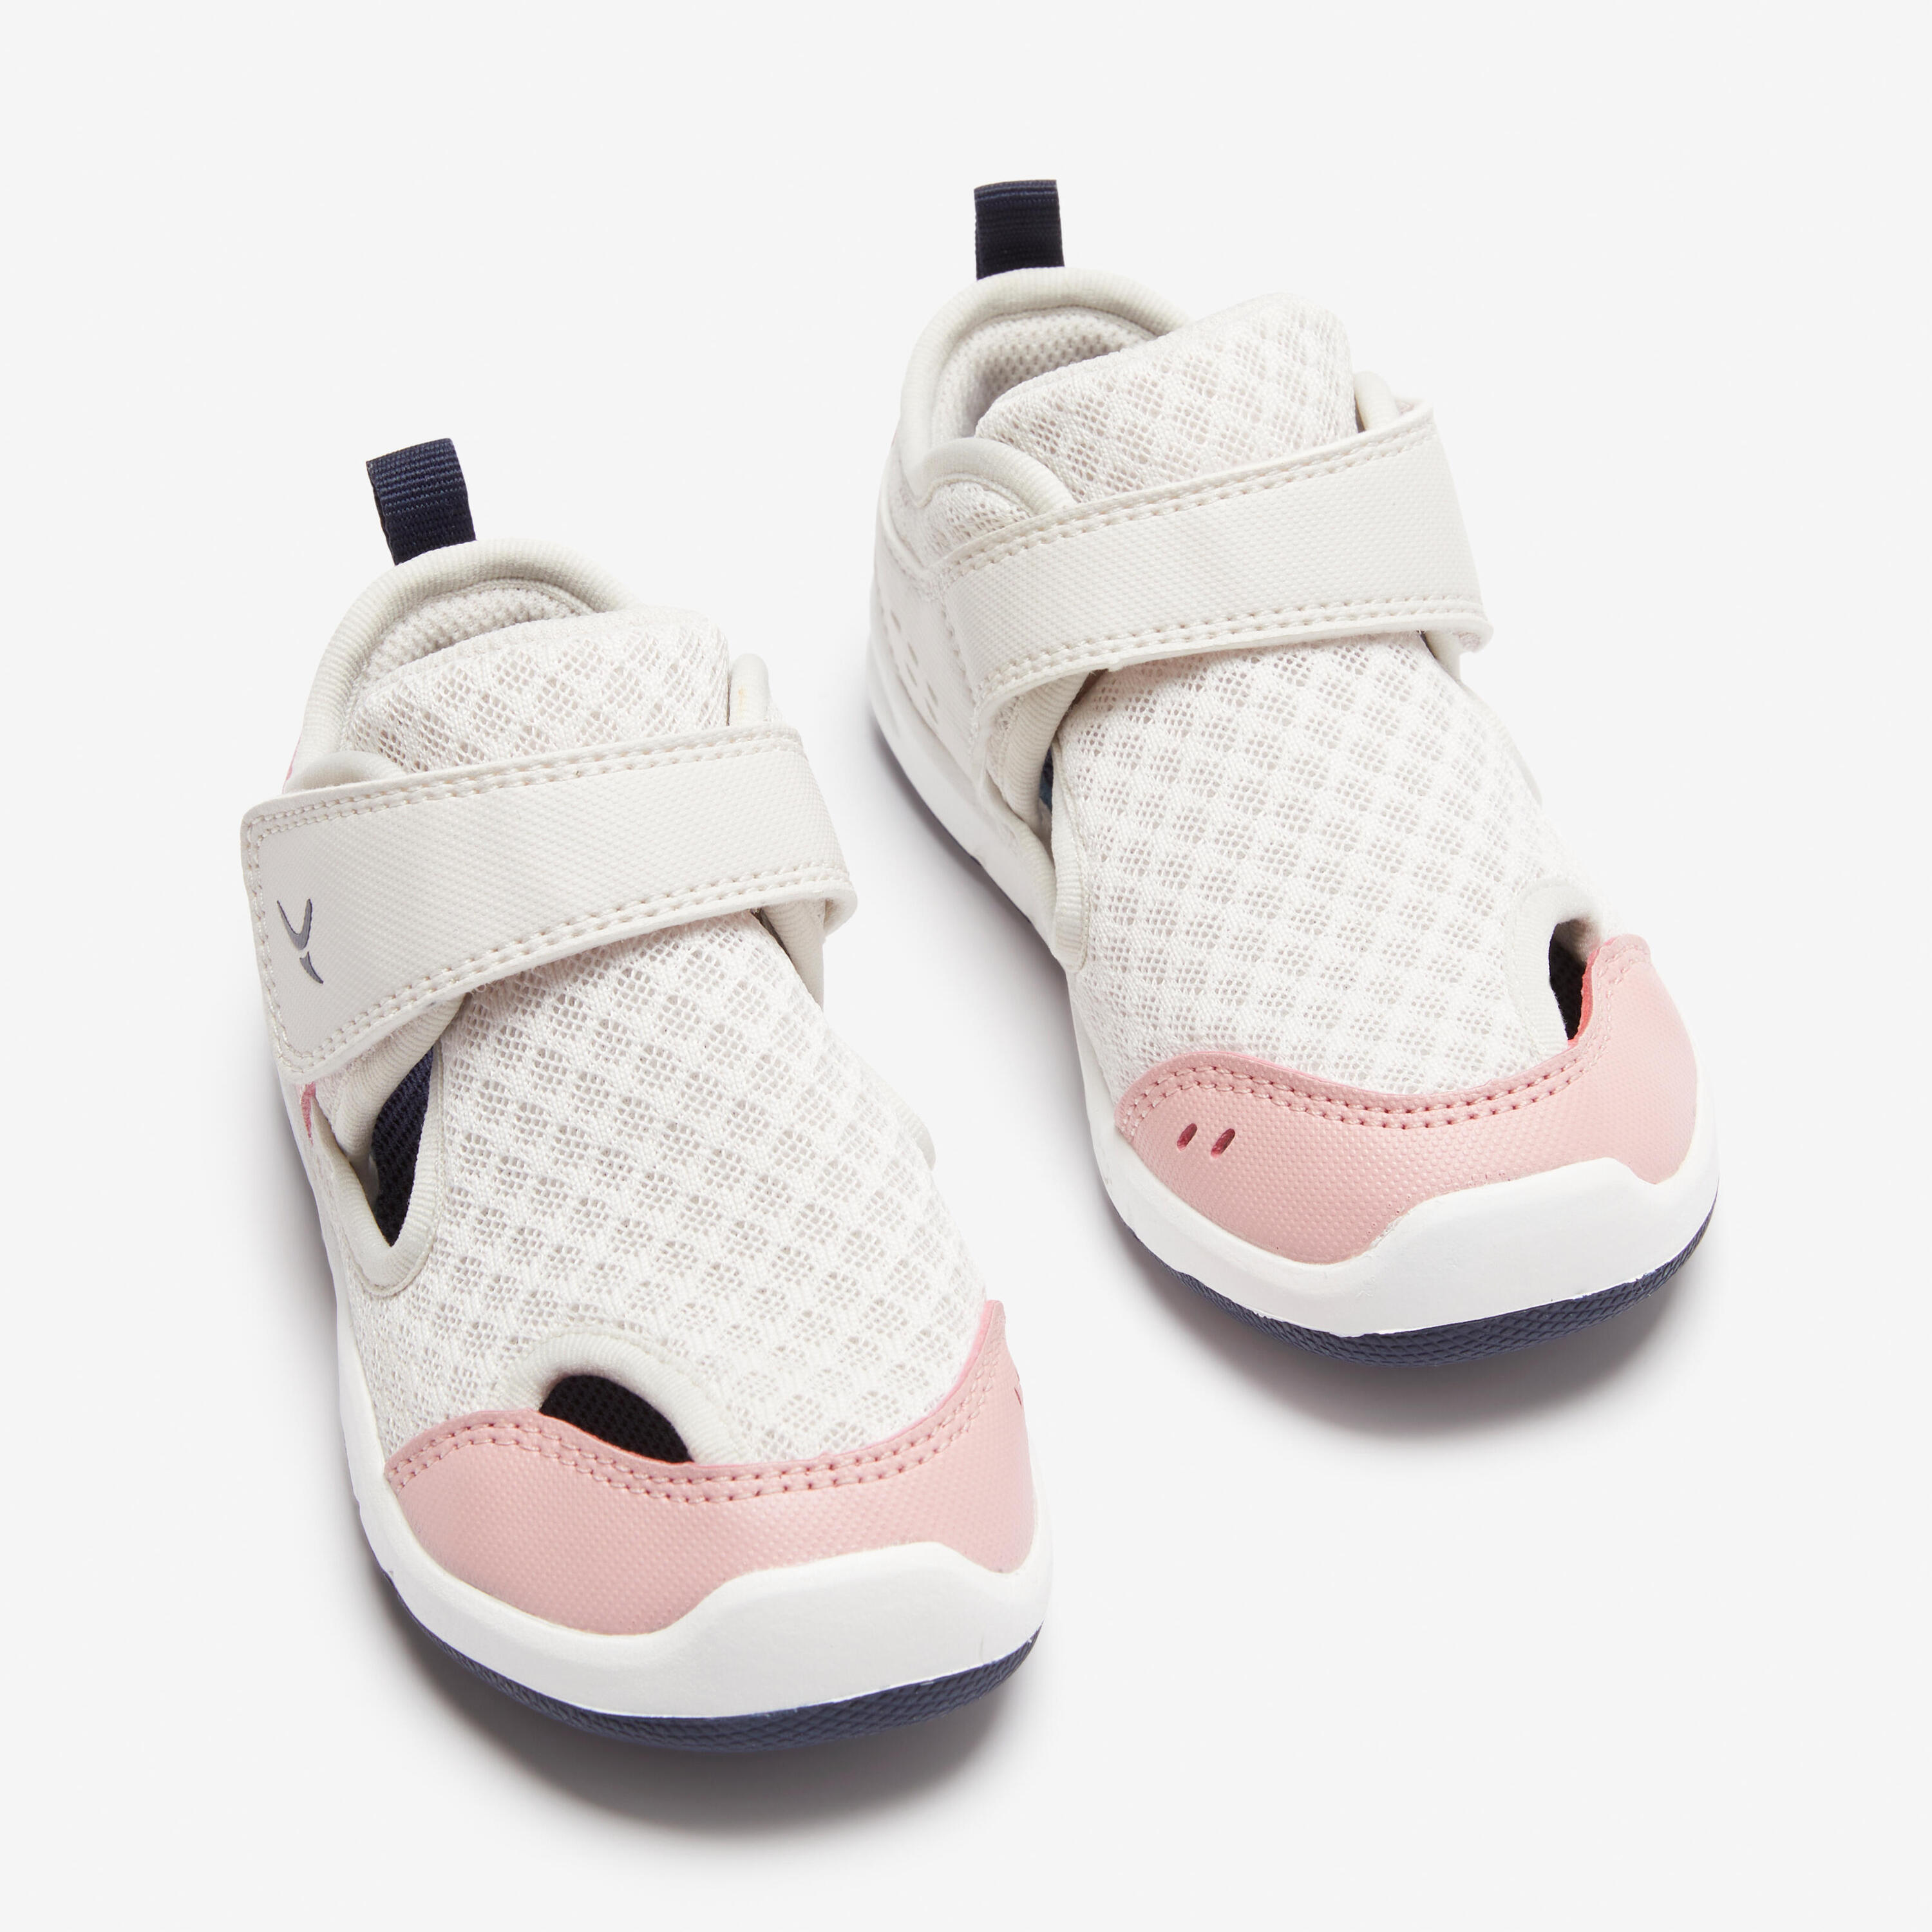 Baby Breathable Shoes I Learn 700 Sizes 3.5C to 6.5C 6/9